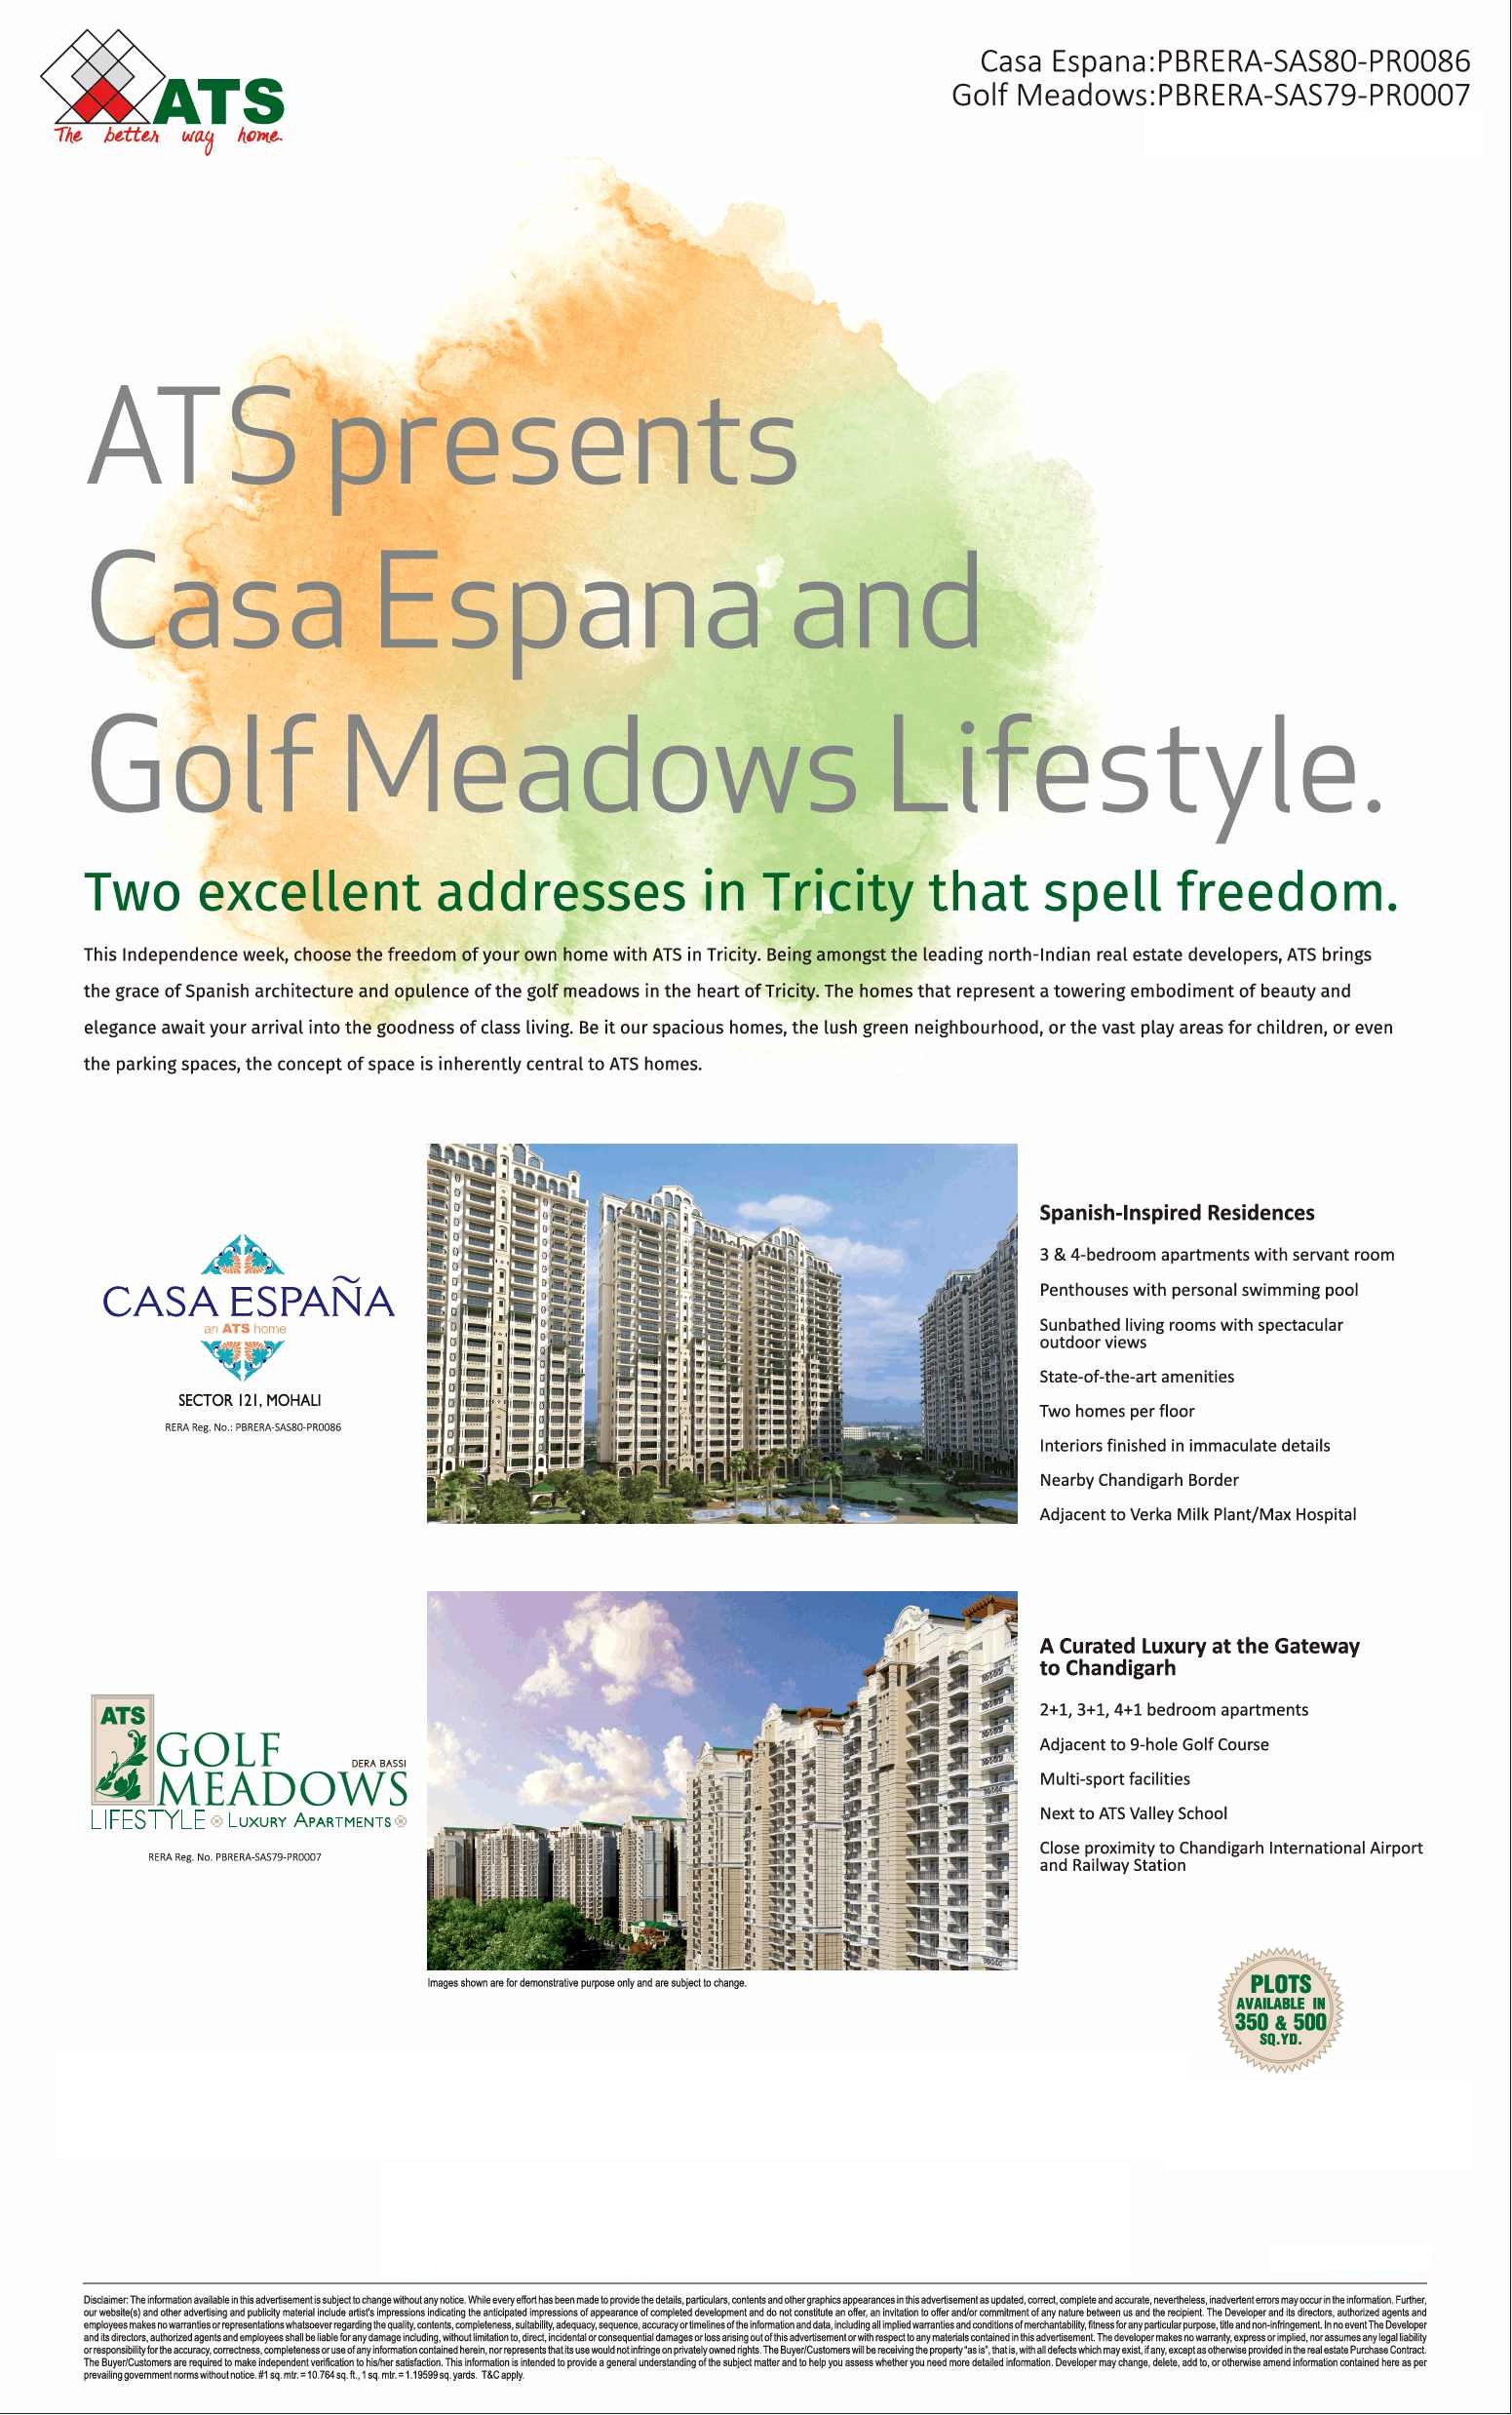 ATS presents Casa Espana & Golf Meadows in Tricity that spell freedom in Chandigarh Update